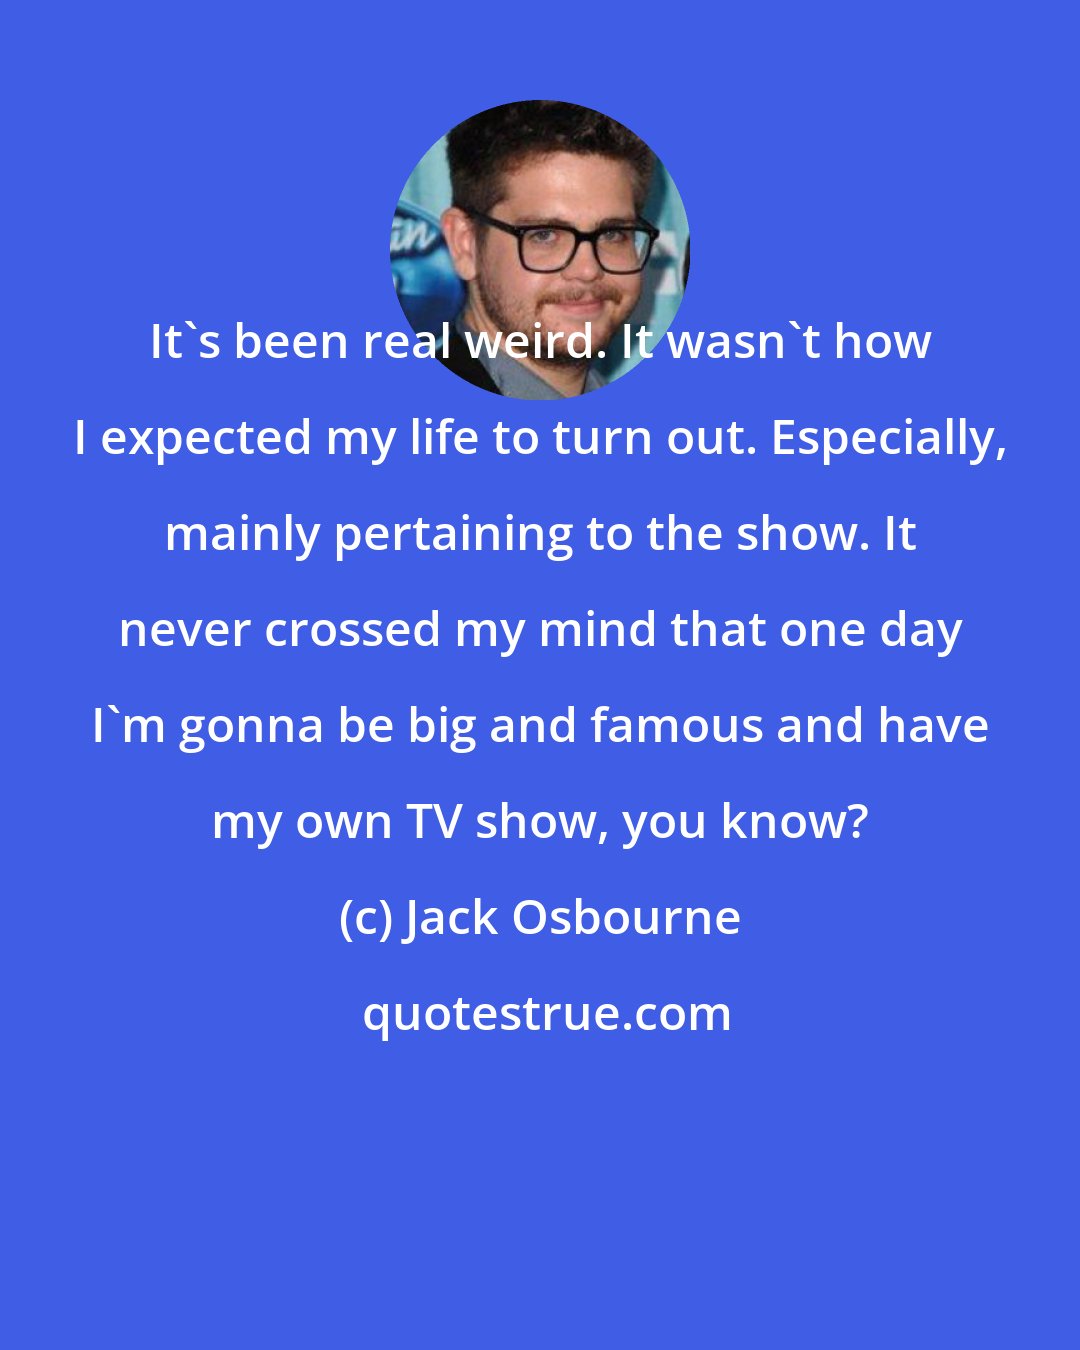 Jack Osbourne: It's been real weird. It wasn't how I expected my life to turn out. Especially, mainly pertaining to the show. It never crossed my mind that one day I'm gonna be big and famous and have my own TV show, you know?